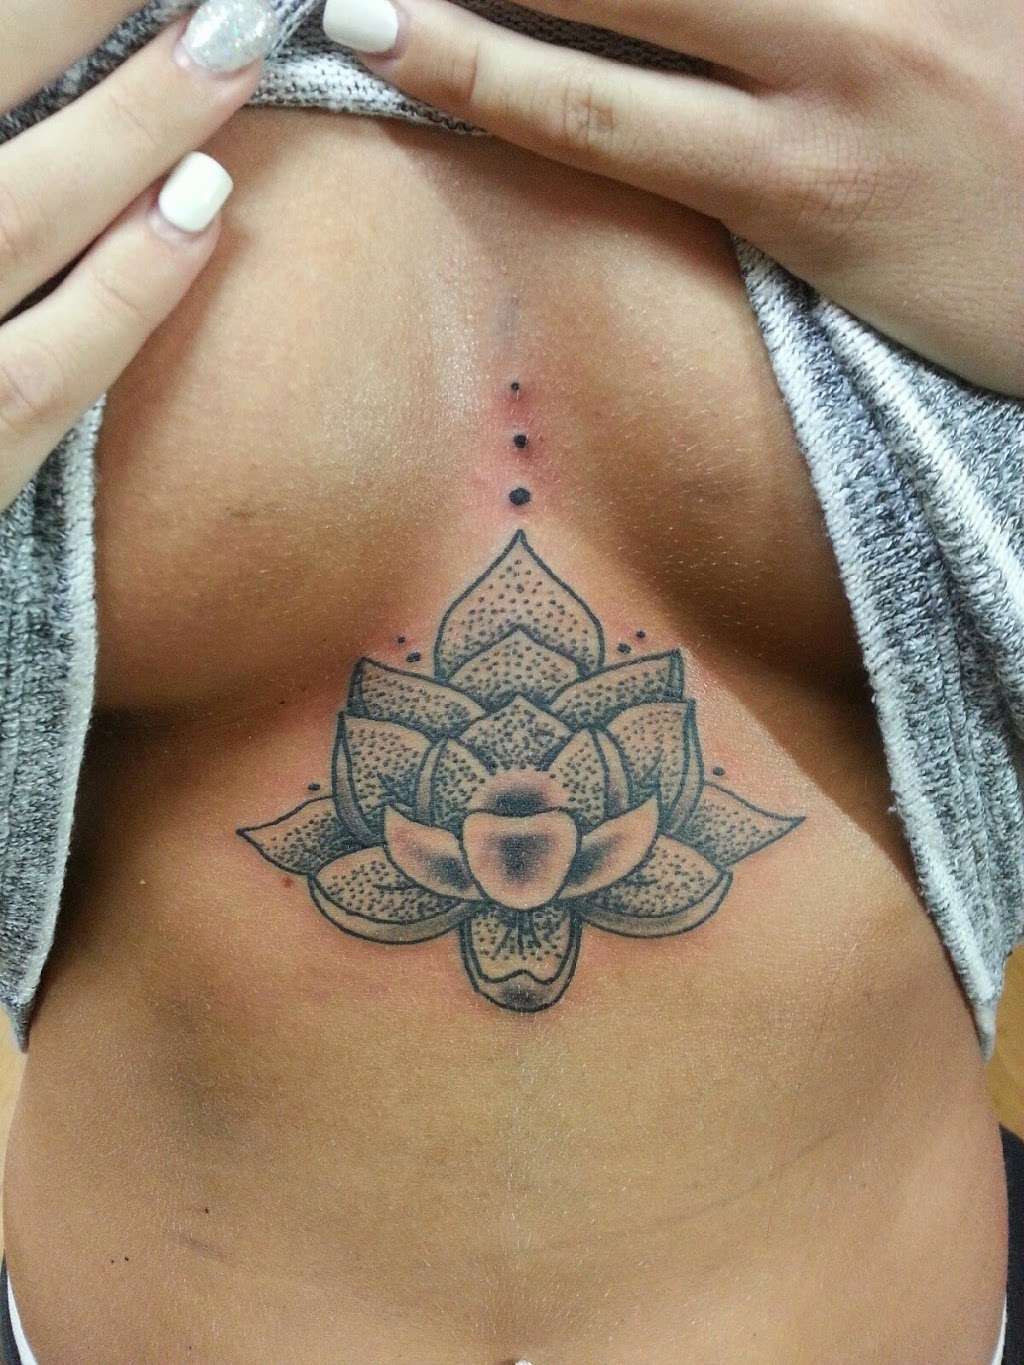 Ace Tattoo and Piercing | 15224 N 59th Ave #15, Glendale, AZ 85306, USA | Phone: (623) 937-8282